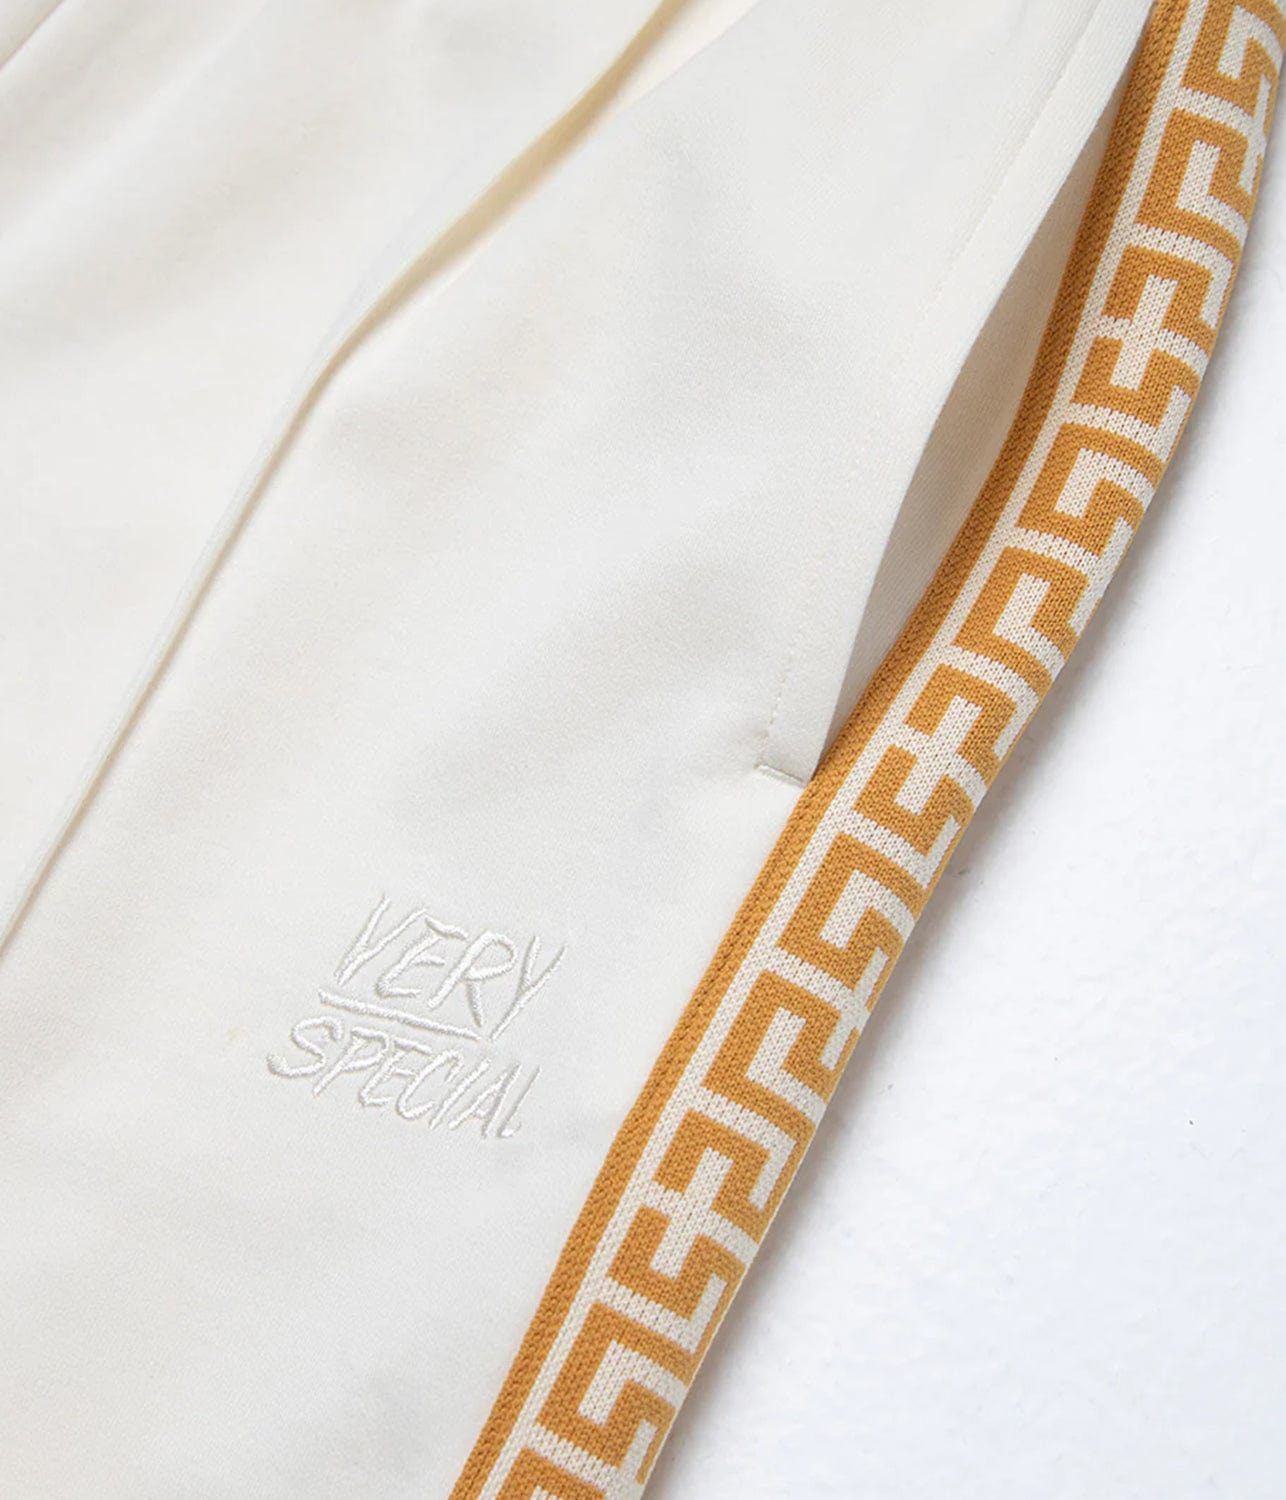 GEO TRACK PANT- CREAM | SOMETHING VERY SPECIAL |  SOMETHING VERY SPECIAL GEO TRACK PANT- CREAM